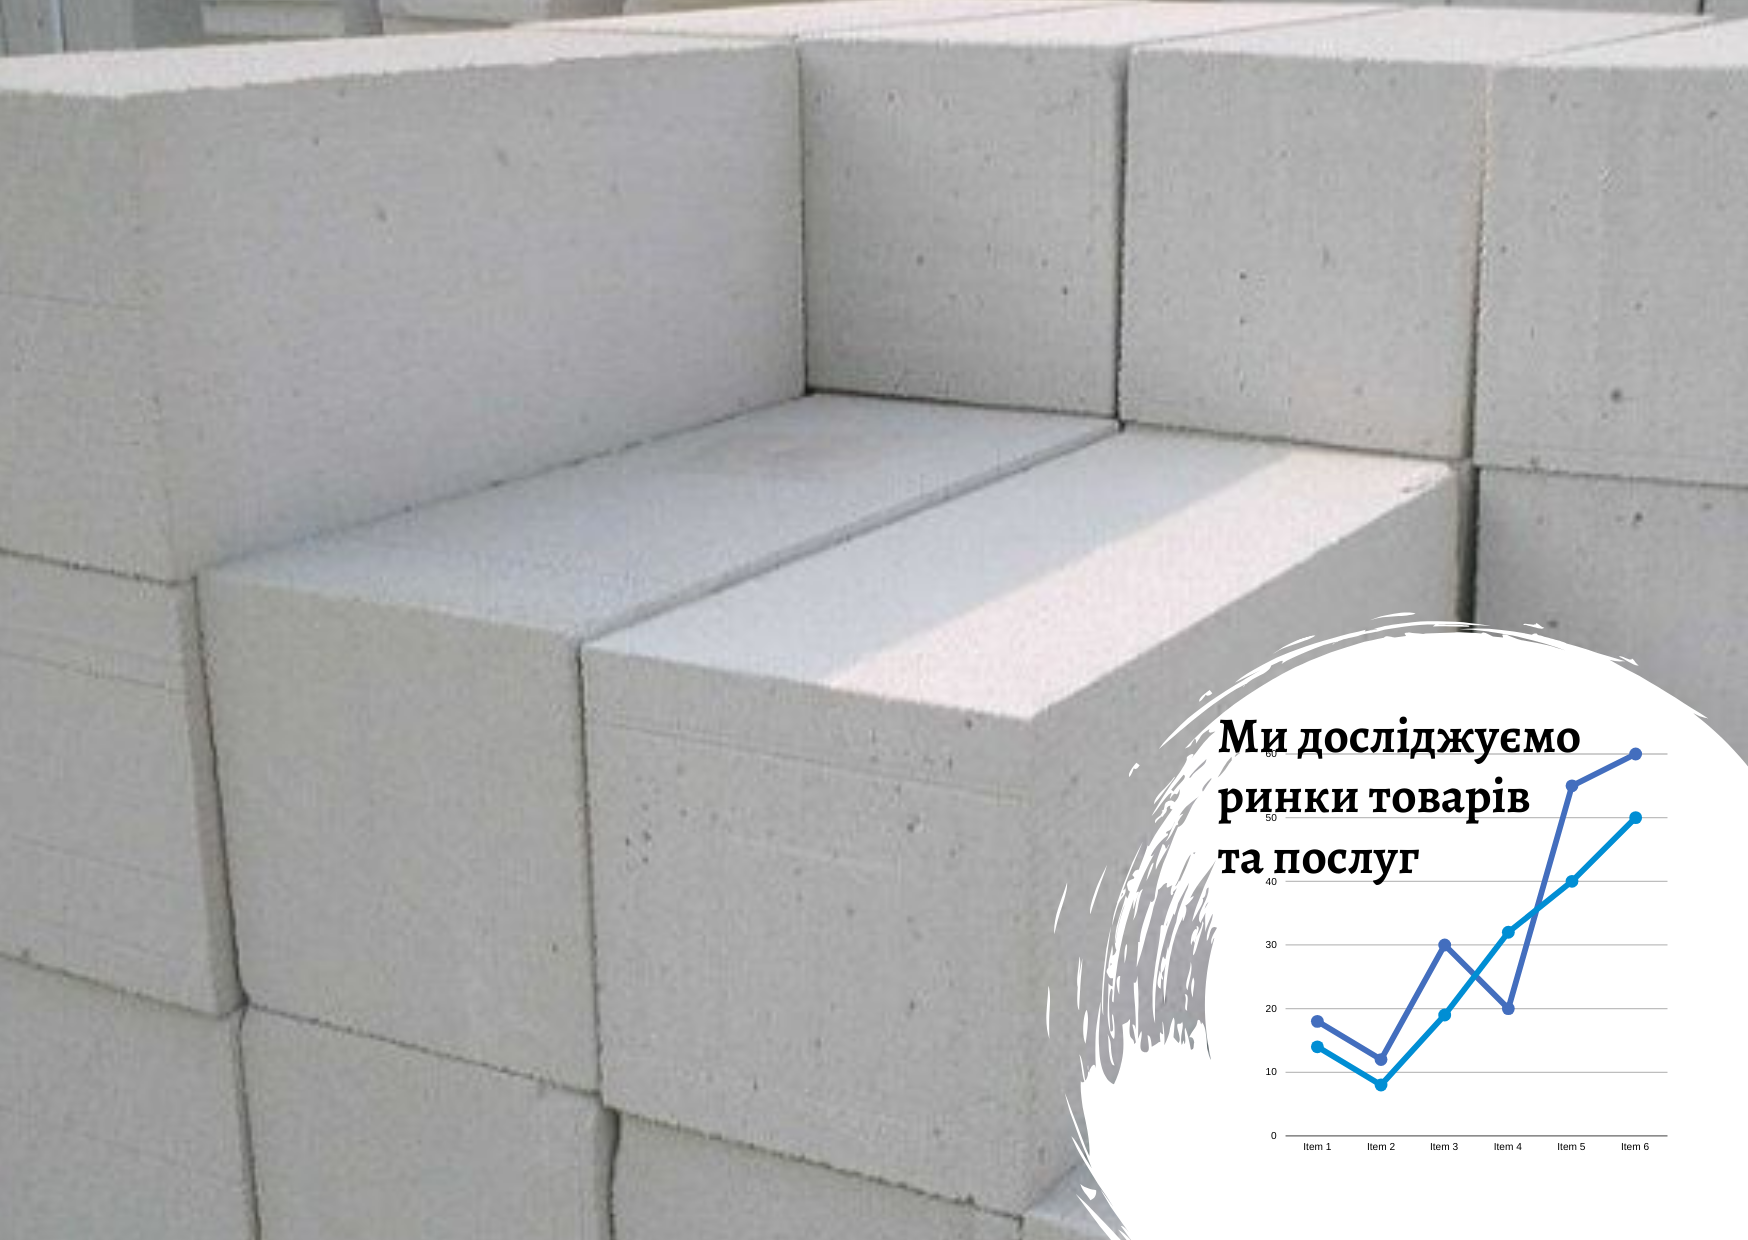 Ukrainian aerated concrete market: problems and current conditions